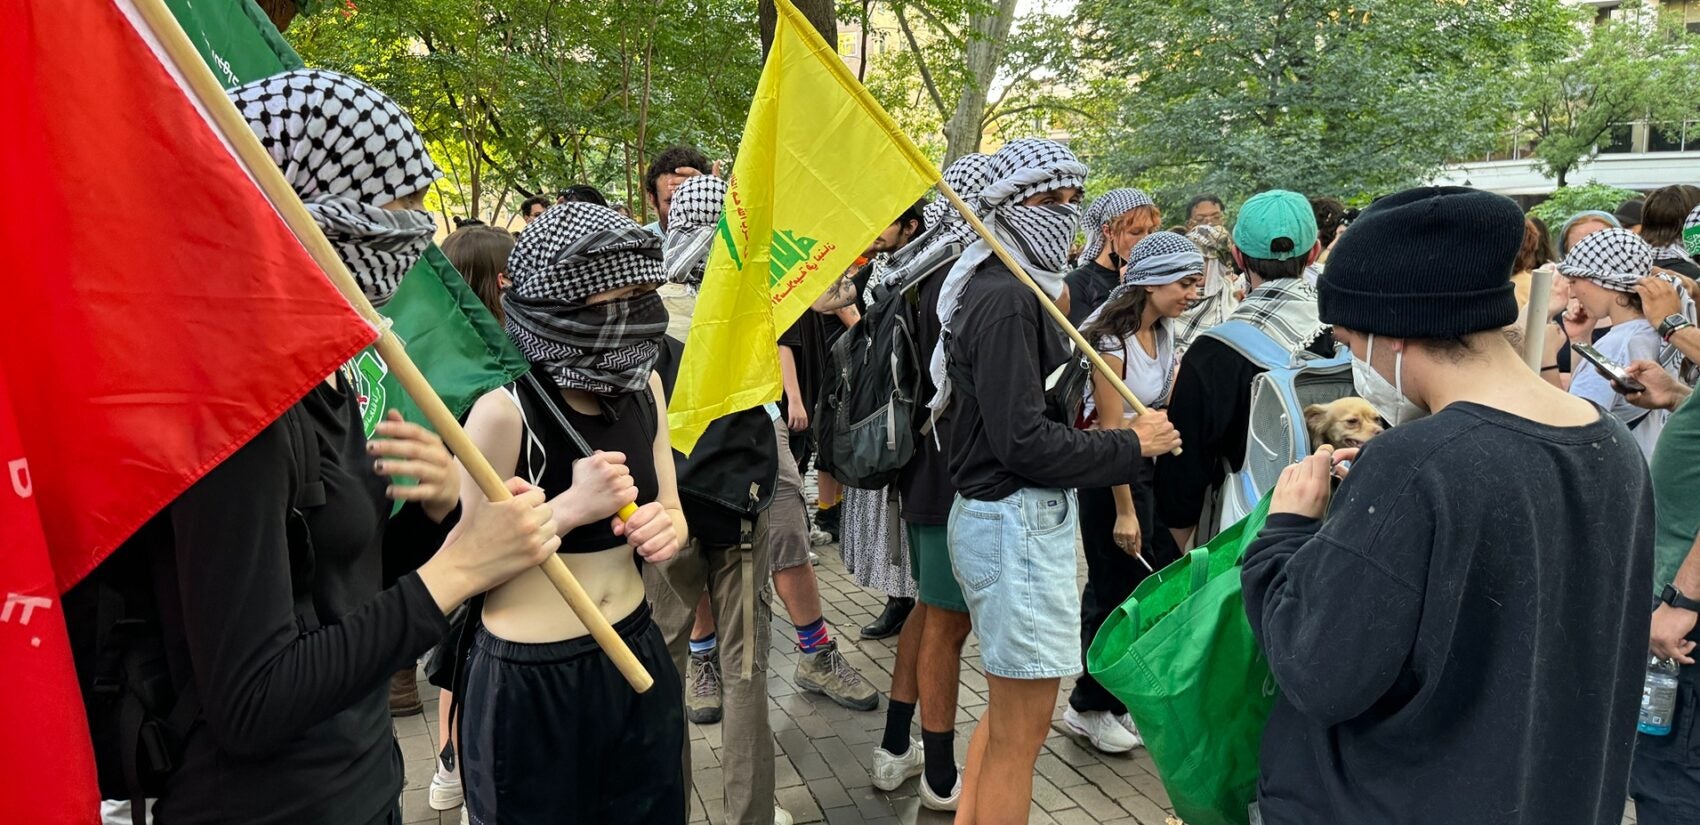 Hundreds rally at Rittenhouse Square on Thursday to condemn Israel’s Gaza occupation and demand an immediate cease-fire before marching to Center City. (Carmen Russell-Sluchansky)